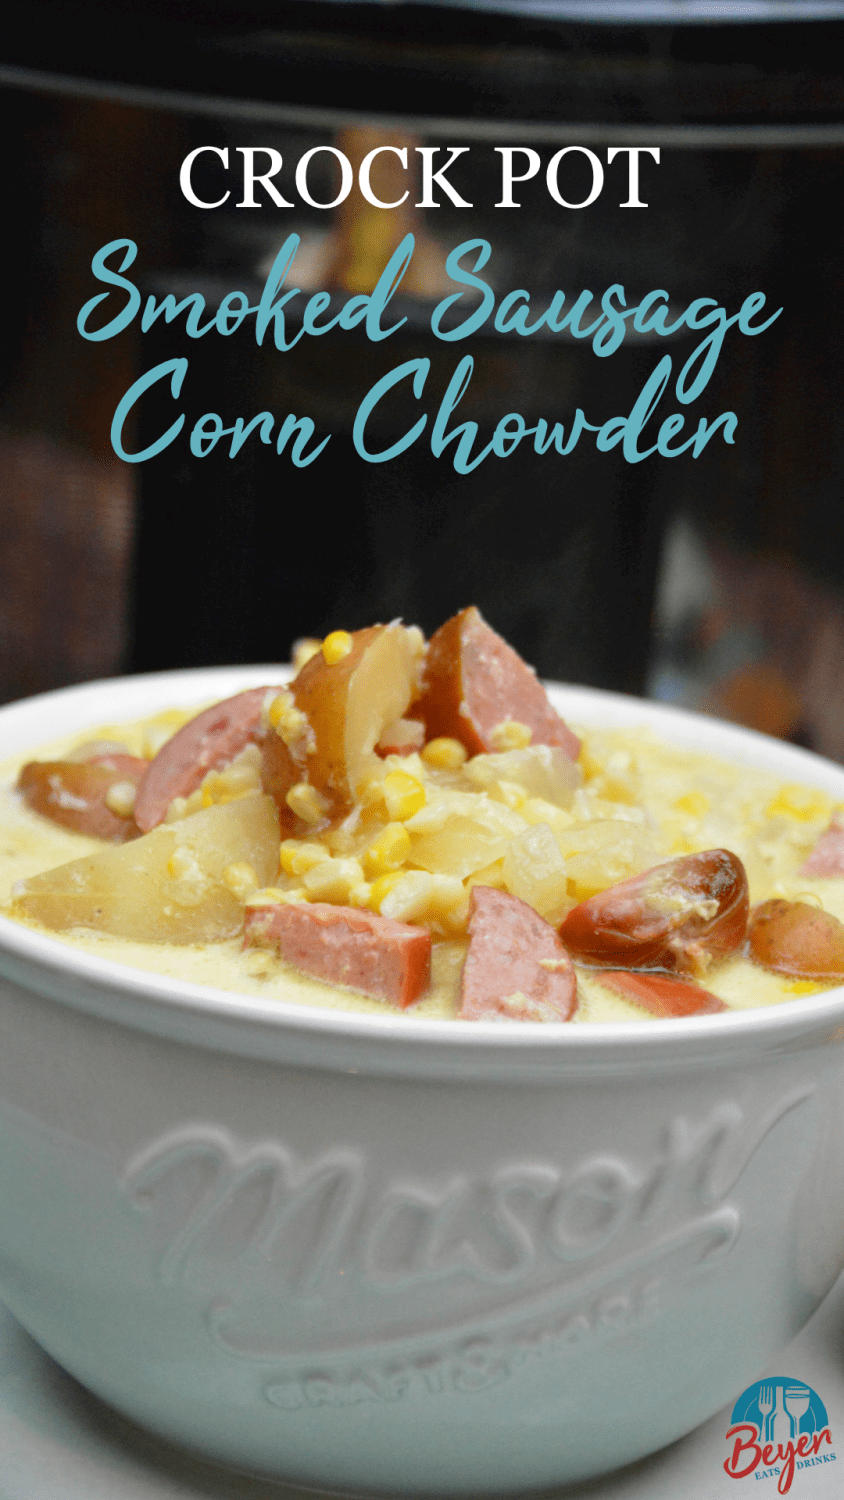 Crock Pot smoked sausage corn chowder is a cream-based soup with smoked sausage, corn, potatoes, and onions for a hearty soup.